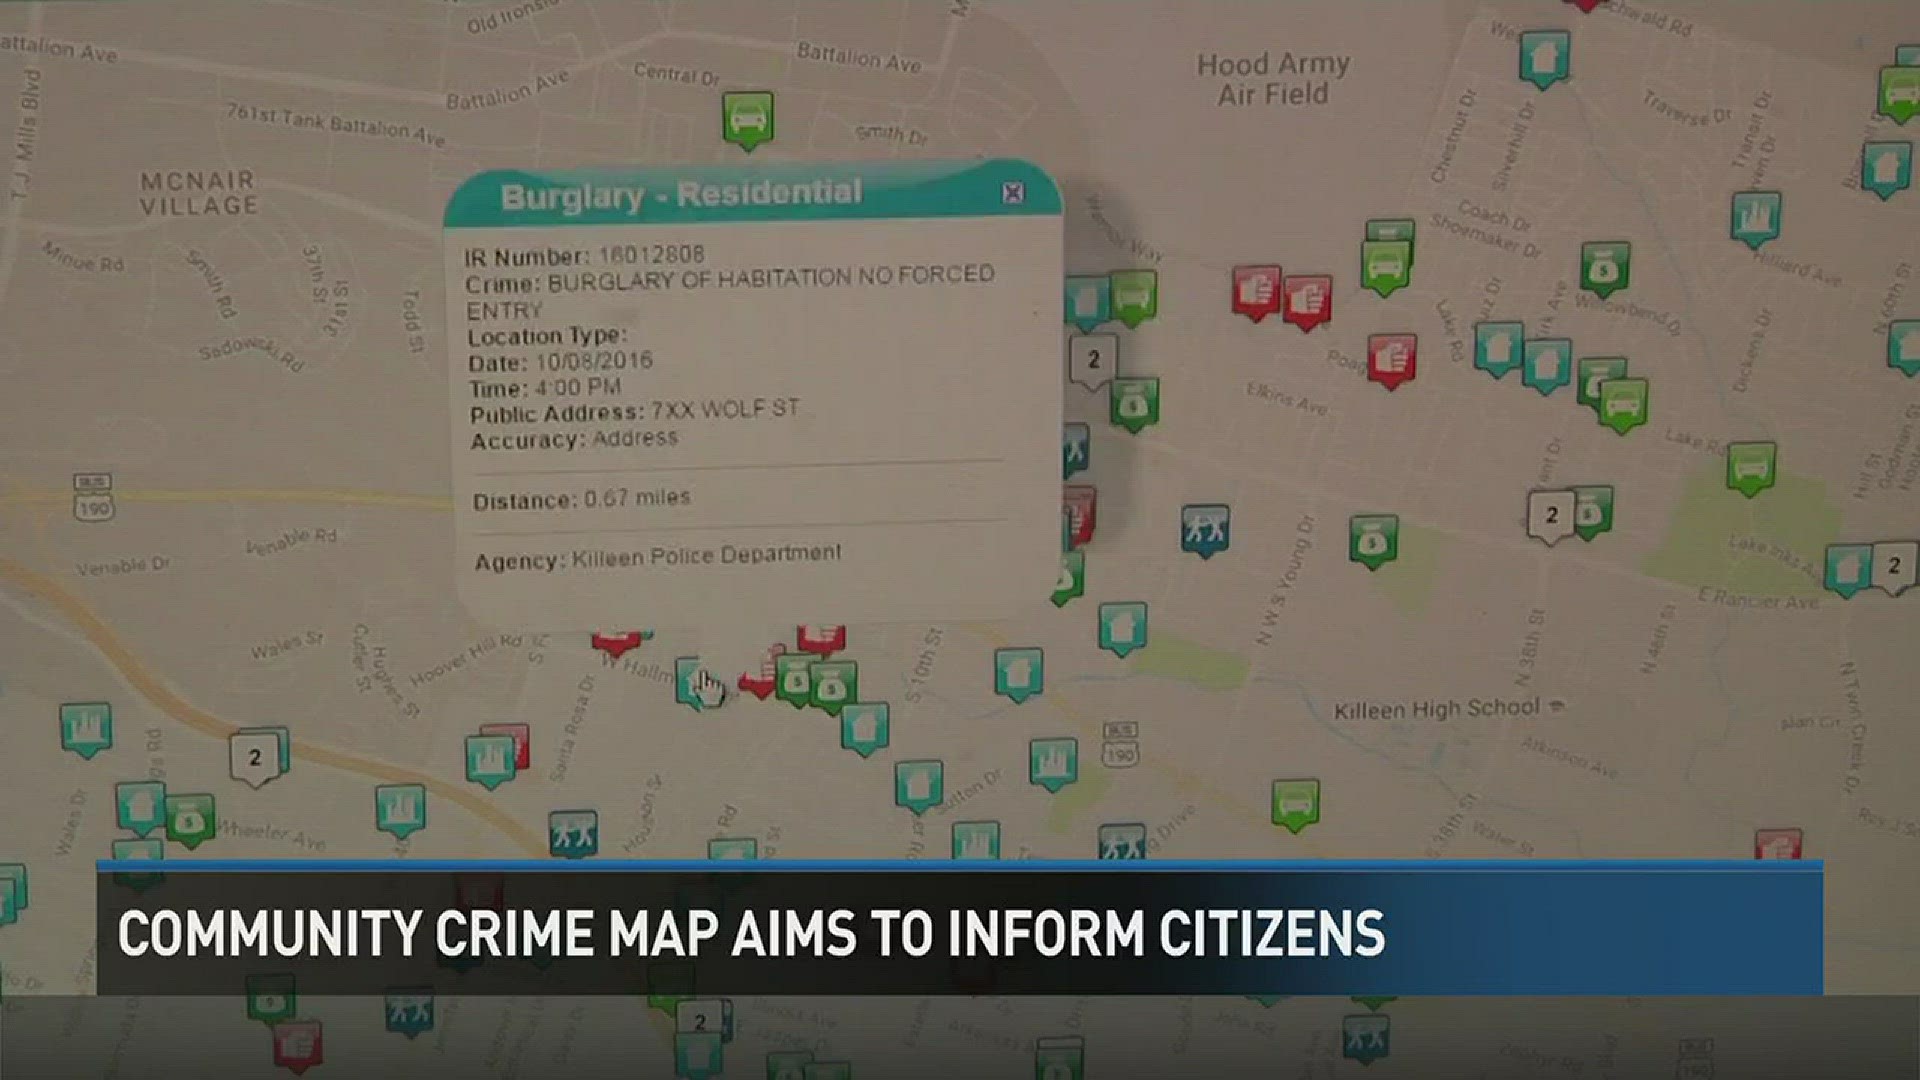 Community crime map aims to improve public safety